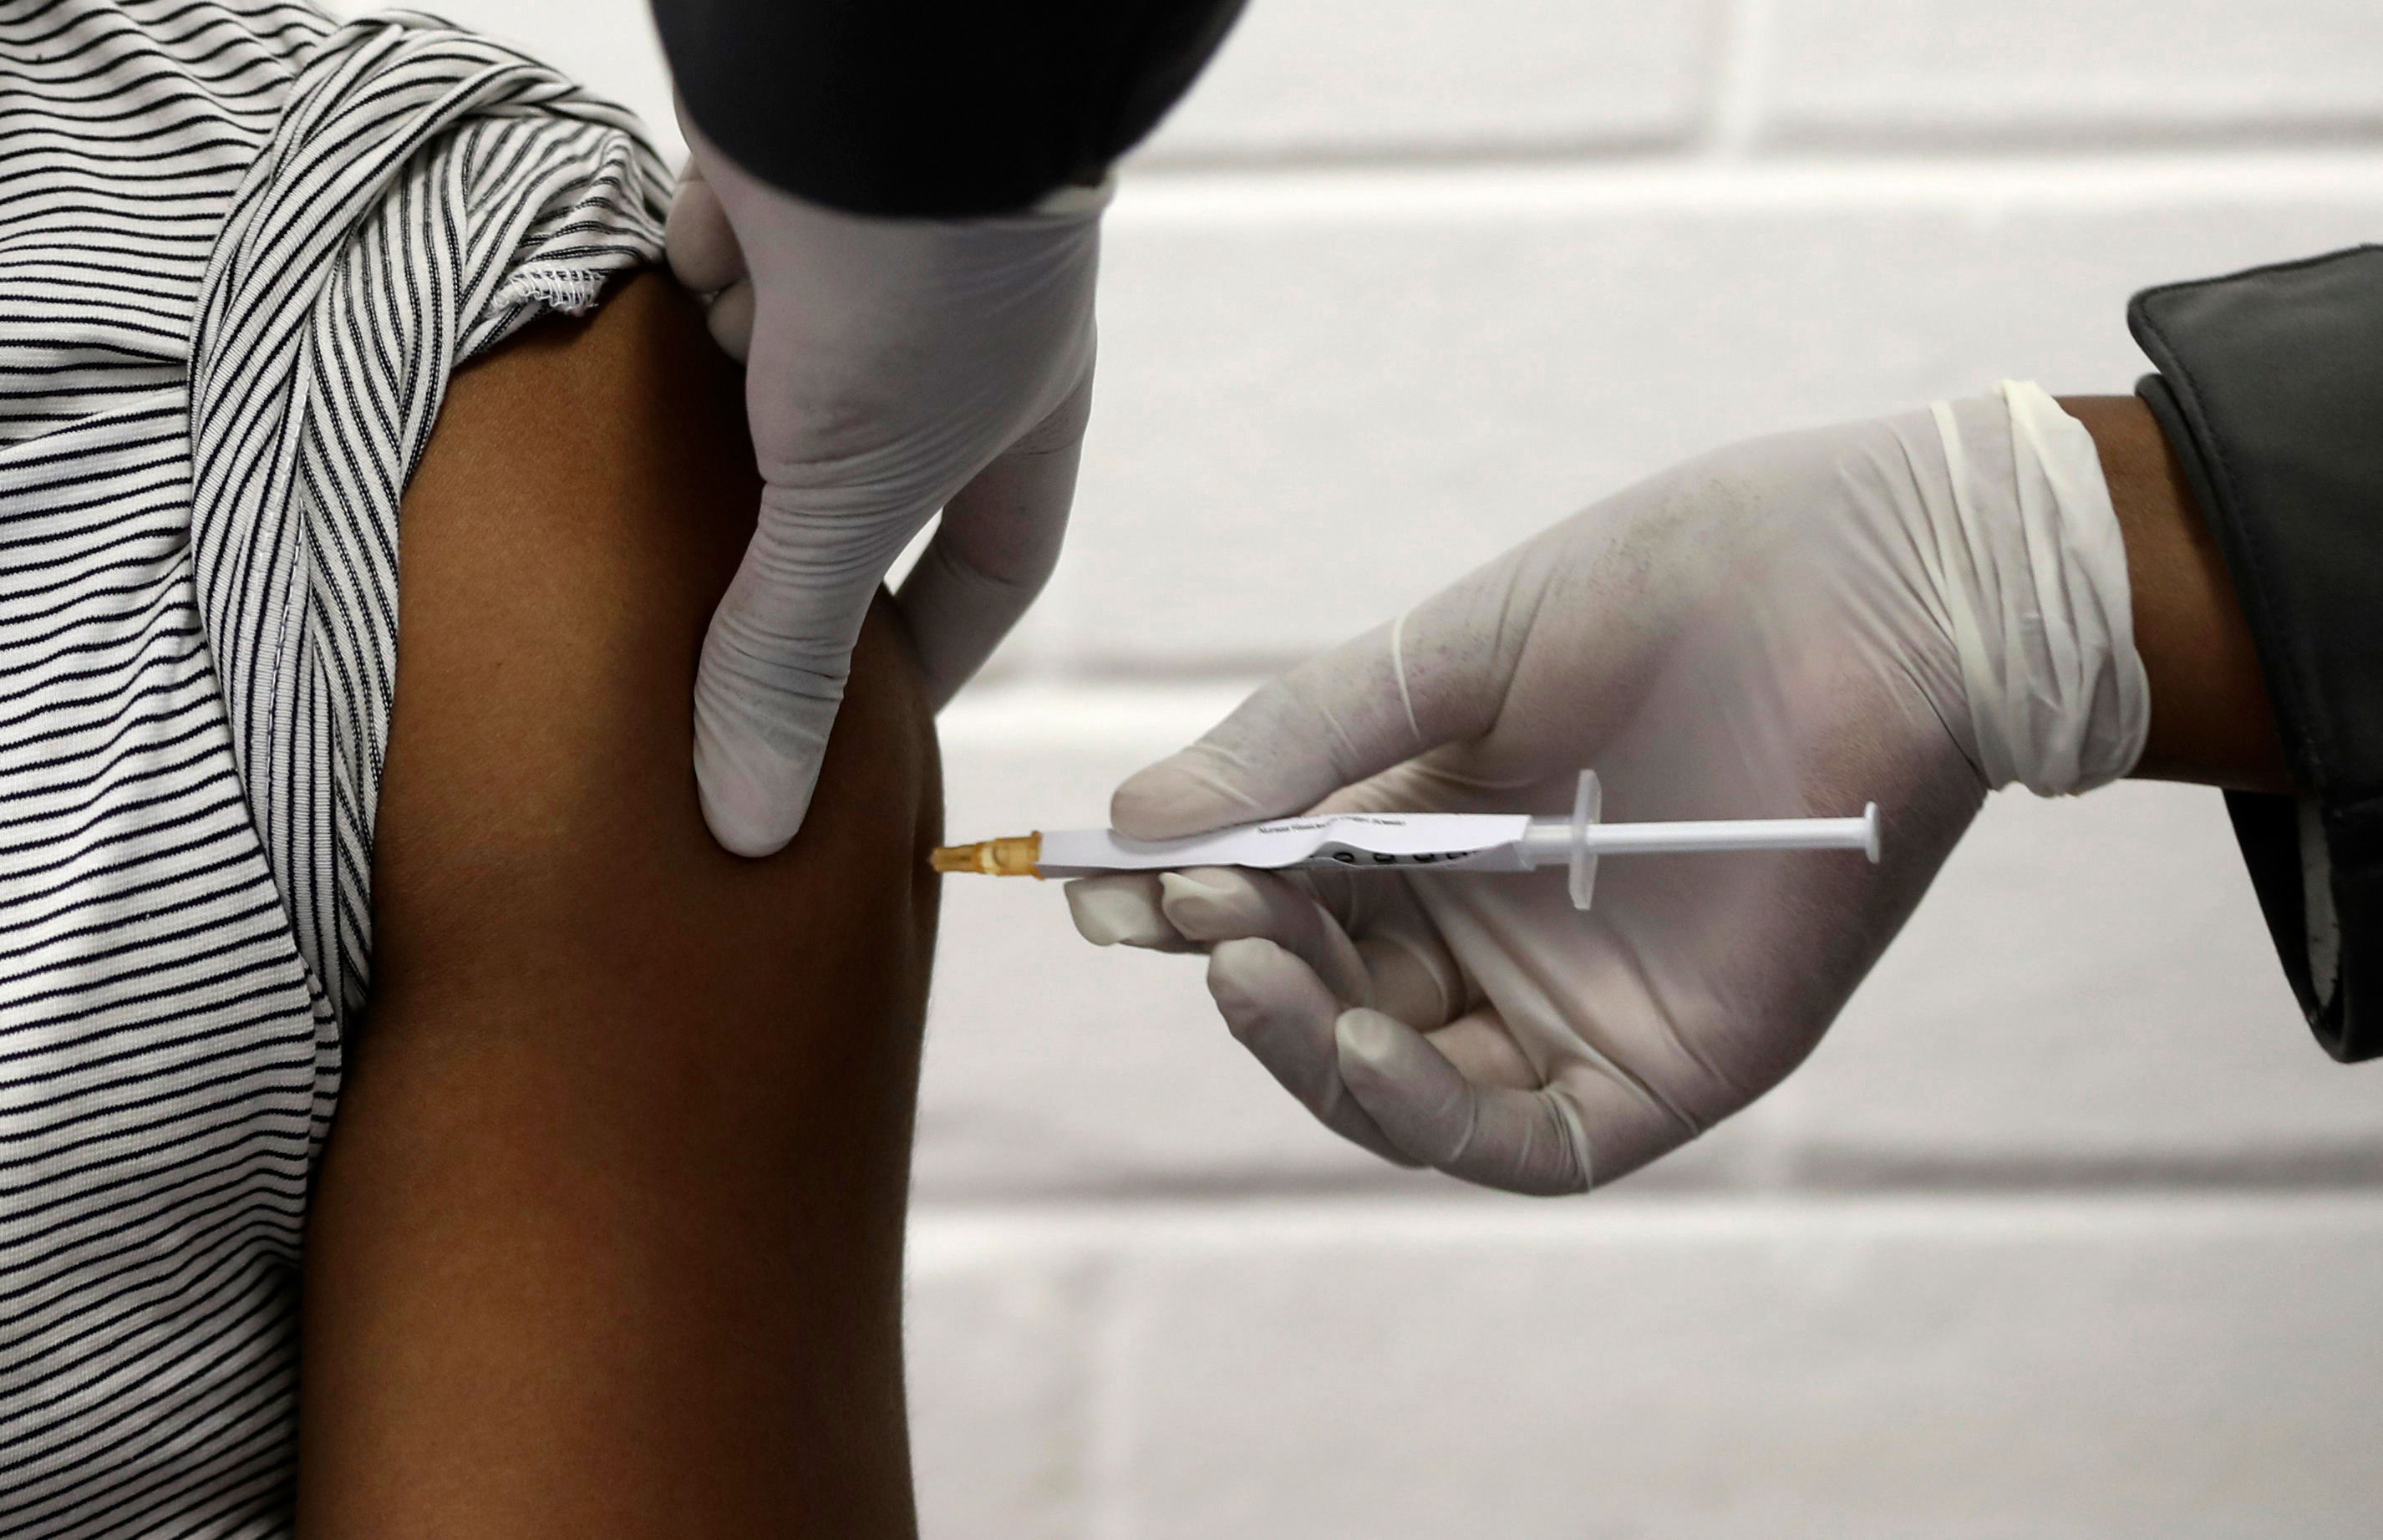 A volunteer receives an injection at a hospital in Soweto, South Africa, on June 24, 2020, as part of Africa's first participation in a Covid-19 vaccine trial developed by the University of Oxford and AstraZeneca.